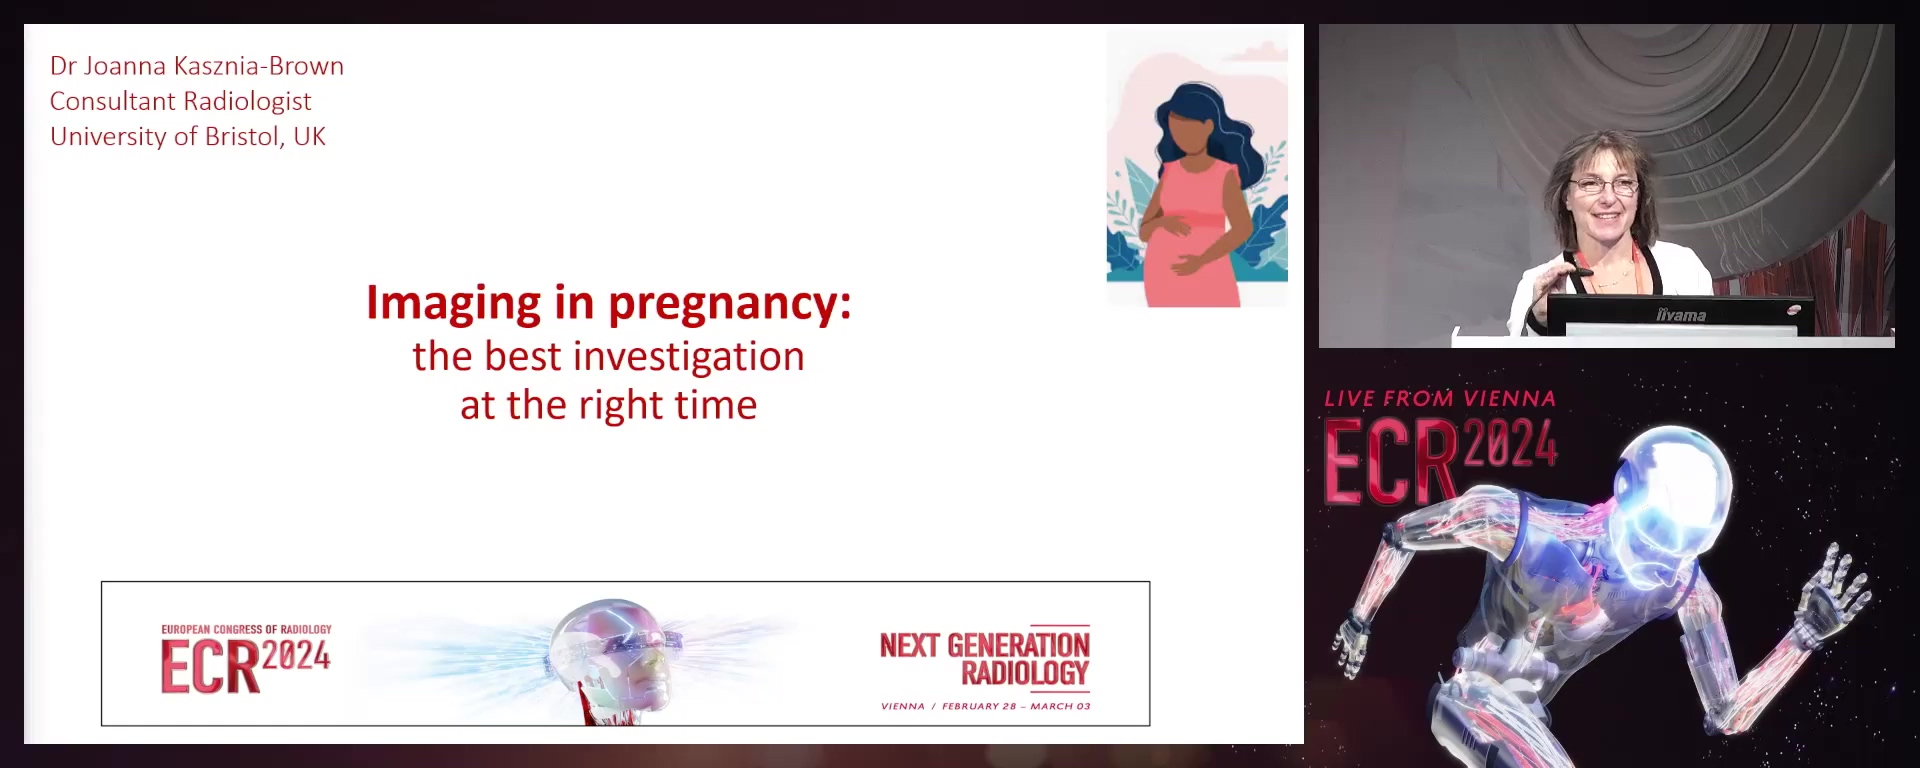 Imaging in pregnancy: the best investigation, at the right time